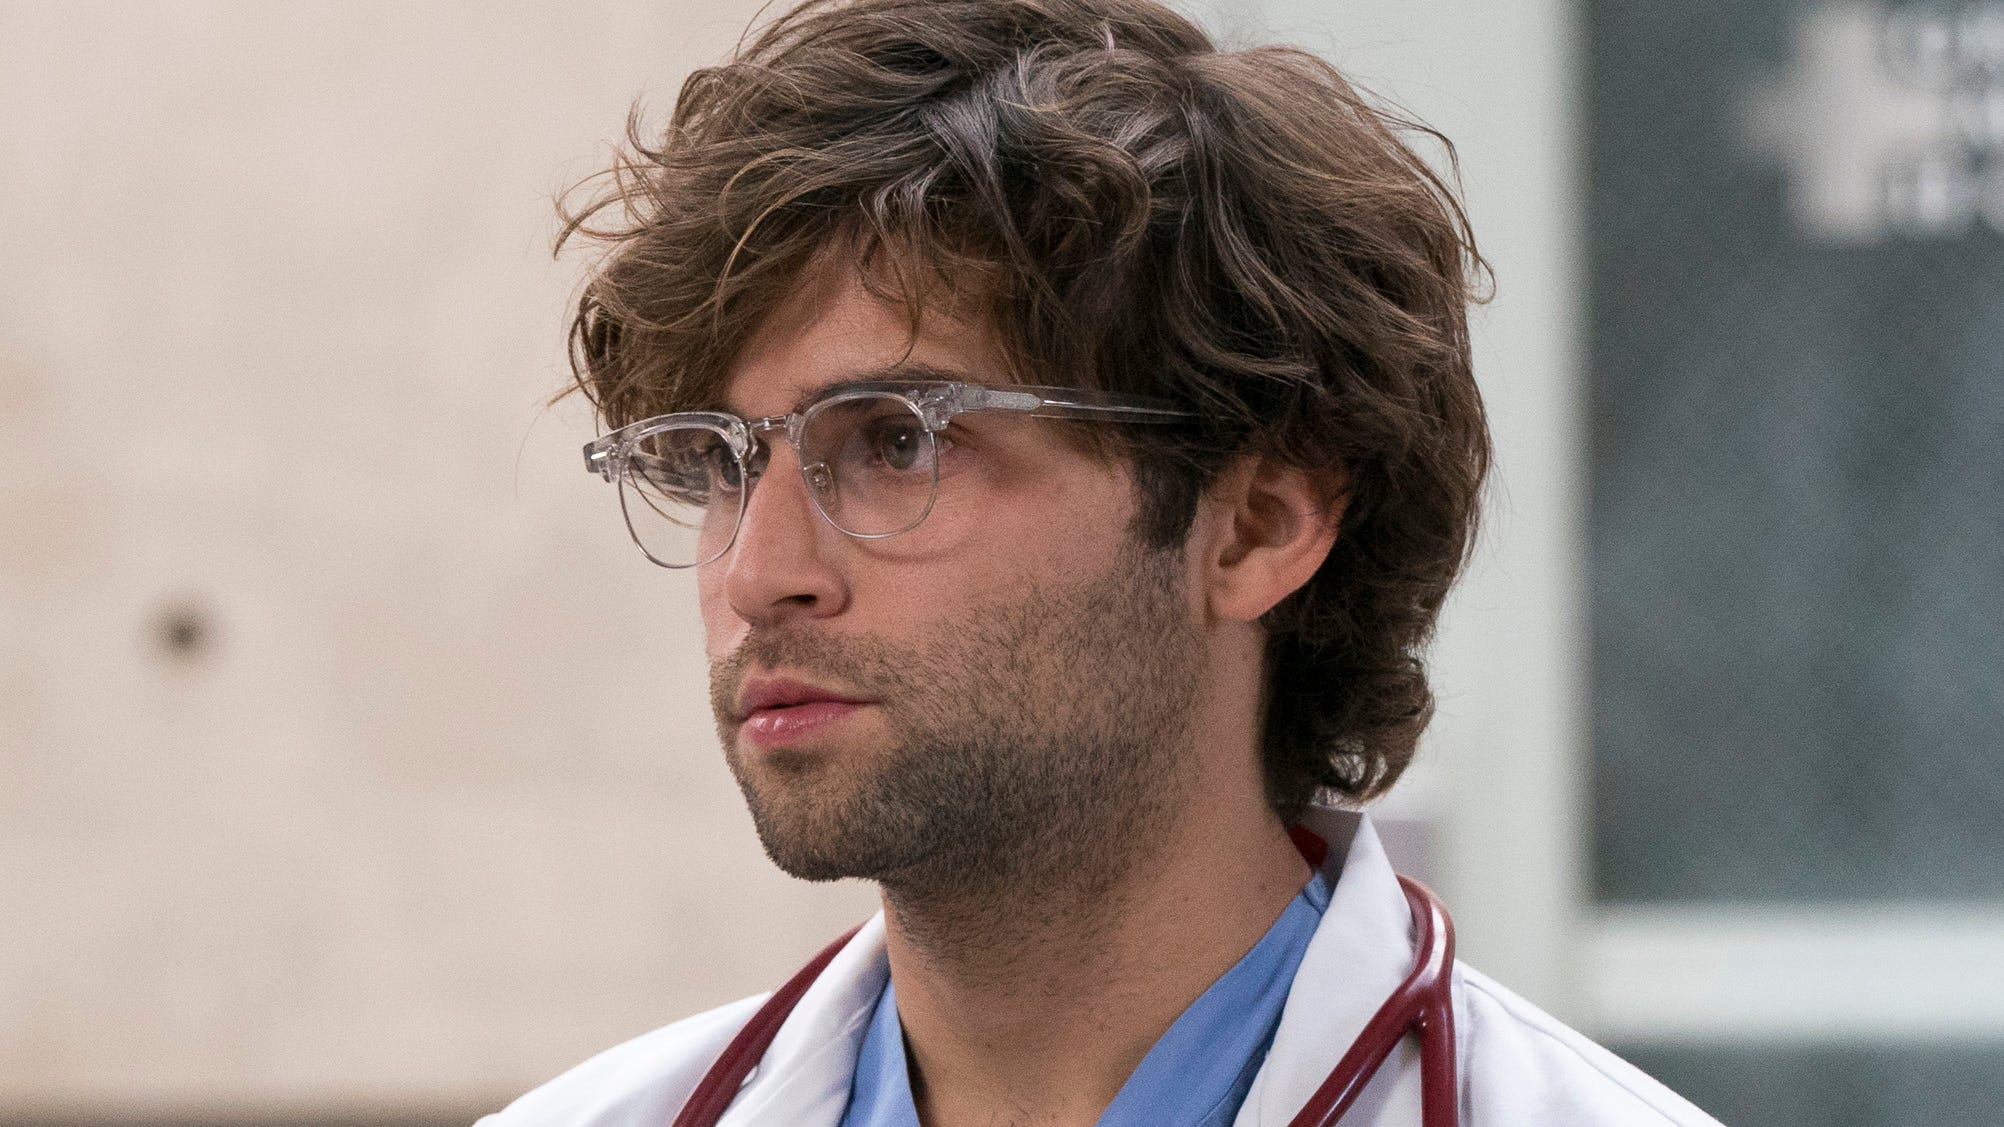 Grey's Anatomy' star Jake Borelli comes out as gay